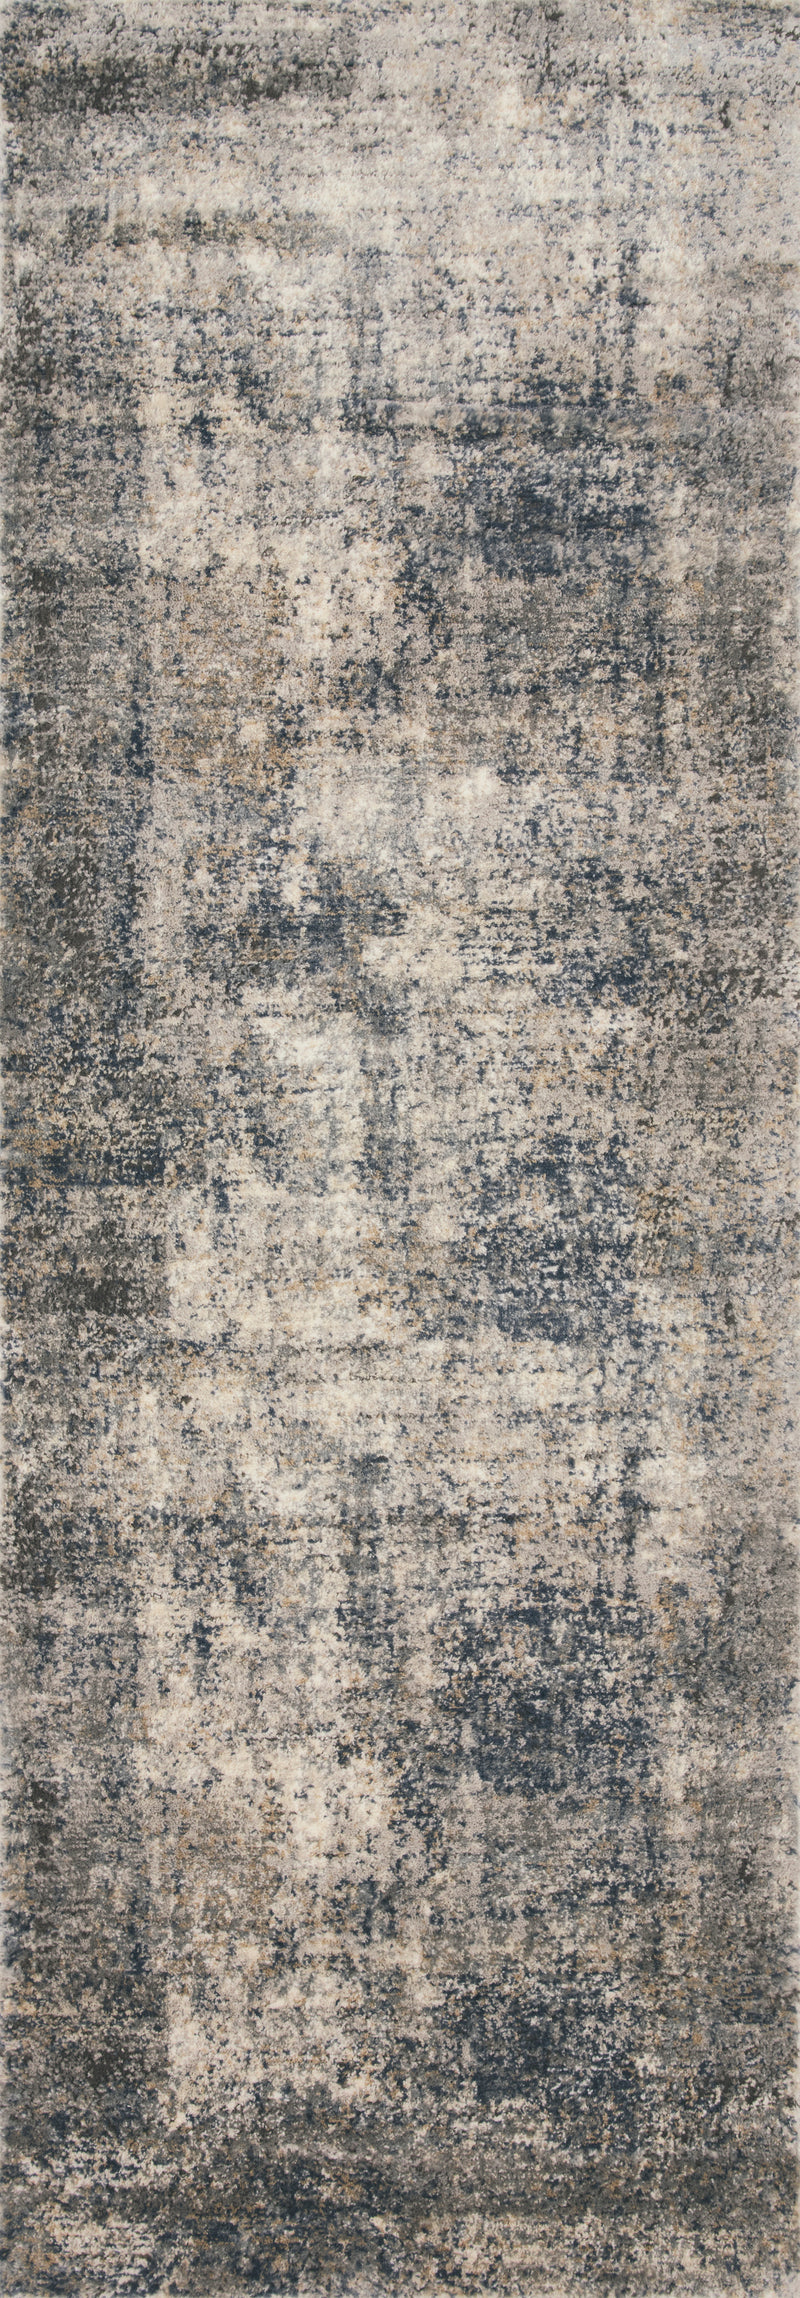 TEAGAN Collection Rug  in  DENIM / SLATE Blue Accent Power-Loomed Viscose